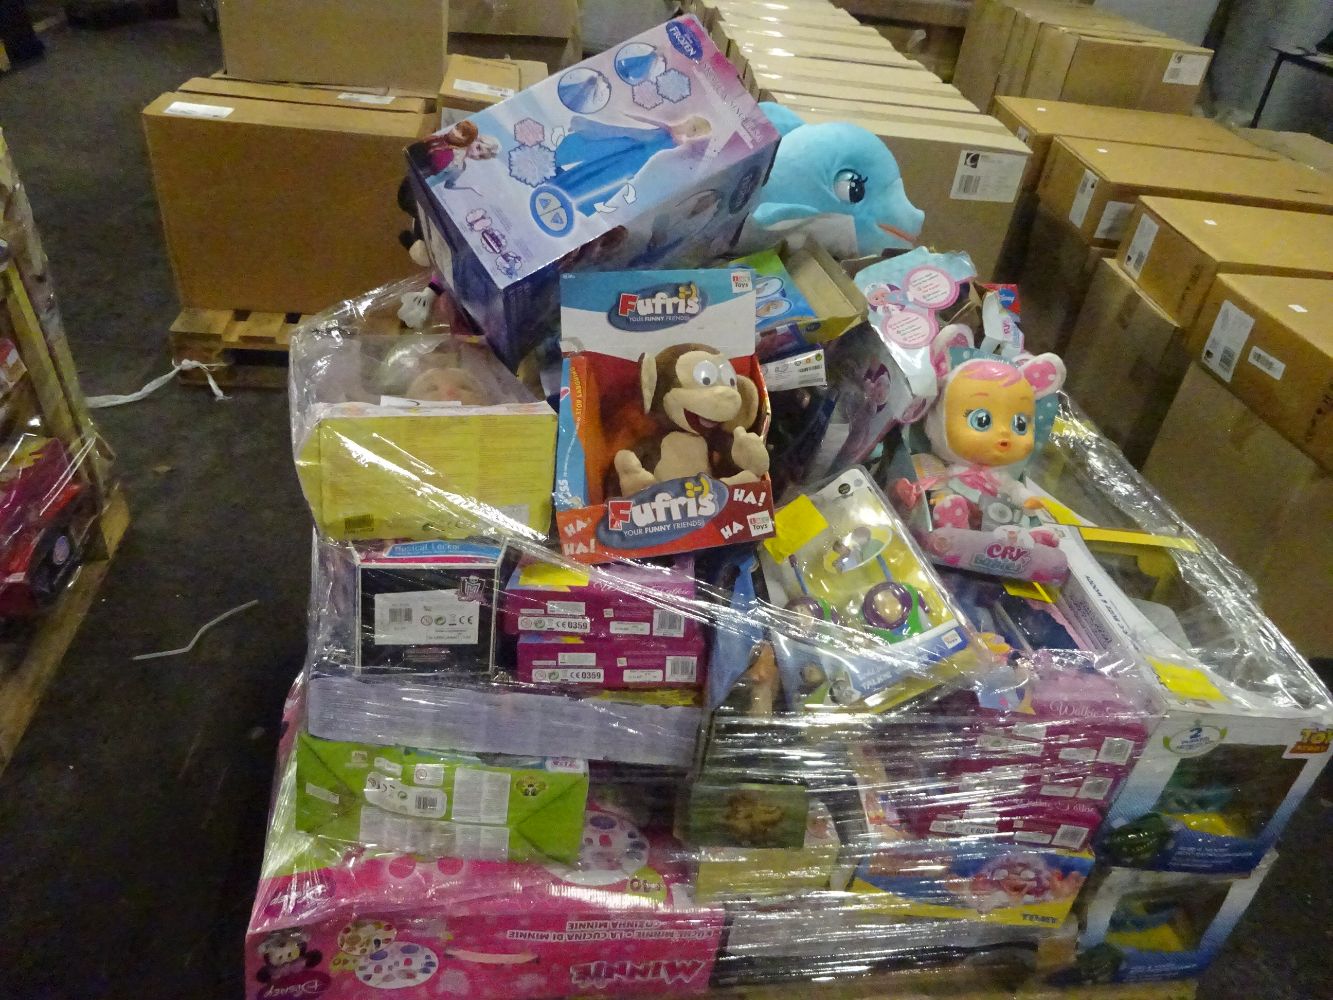 24 PALLETS FULL OF ASSORTED BRANDED TOYS..... THESE ARE CUSTUMER RETURNS FROM A RETAILER.... ALL STARTING BIDS JUST £10!!